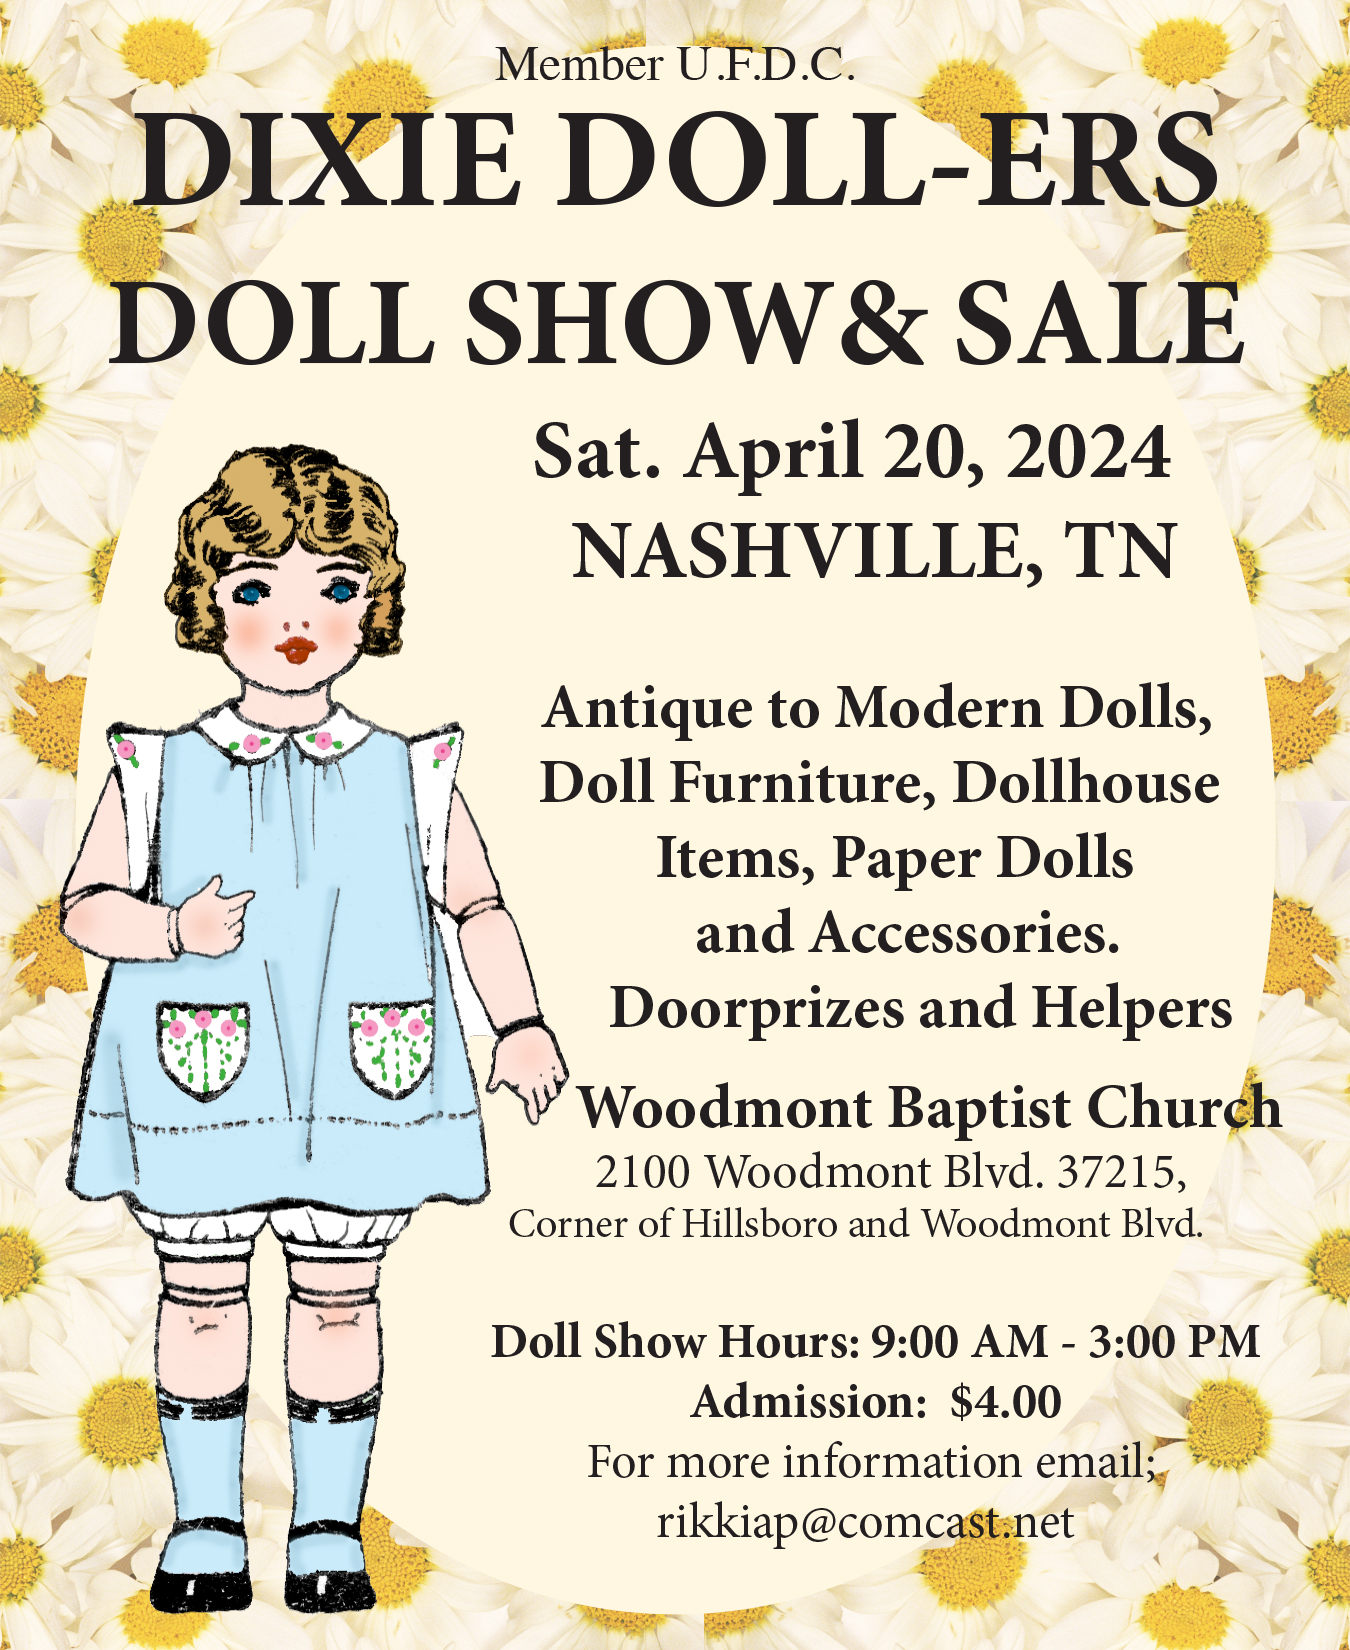 The Dixie Doll-ers Doll Show & Sale